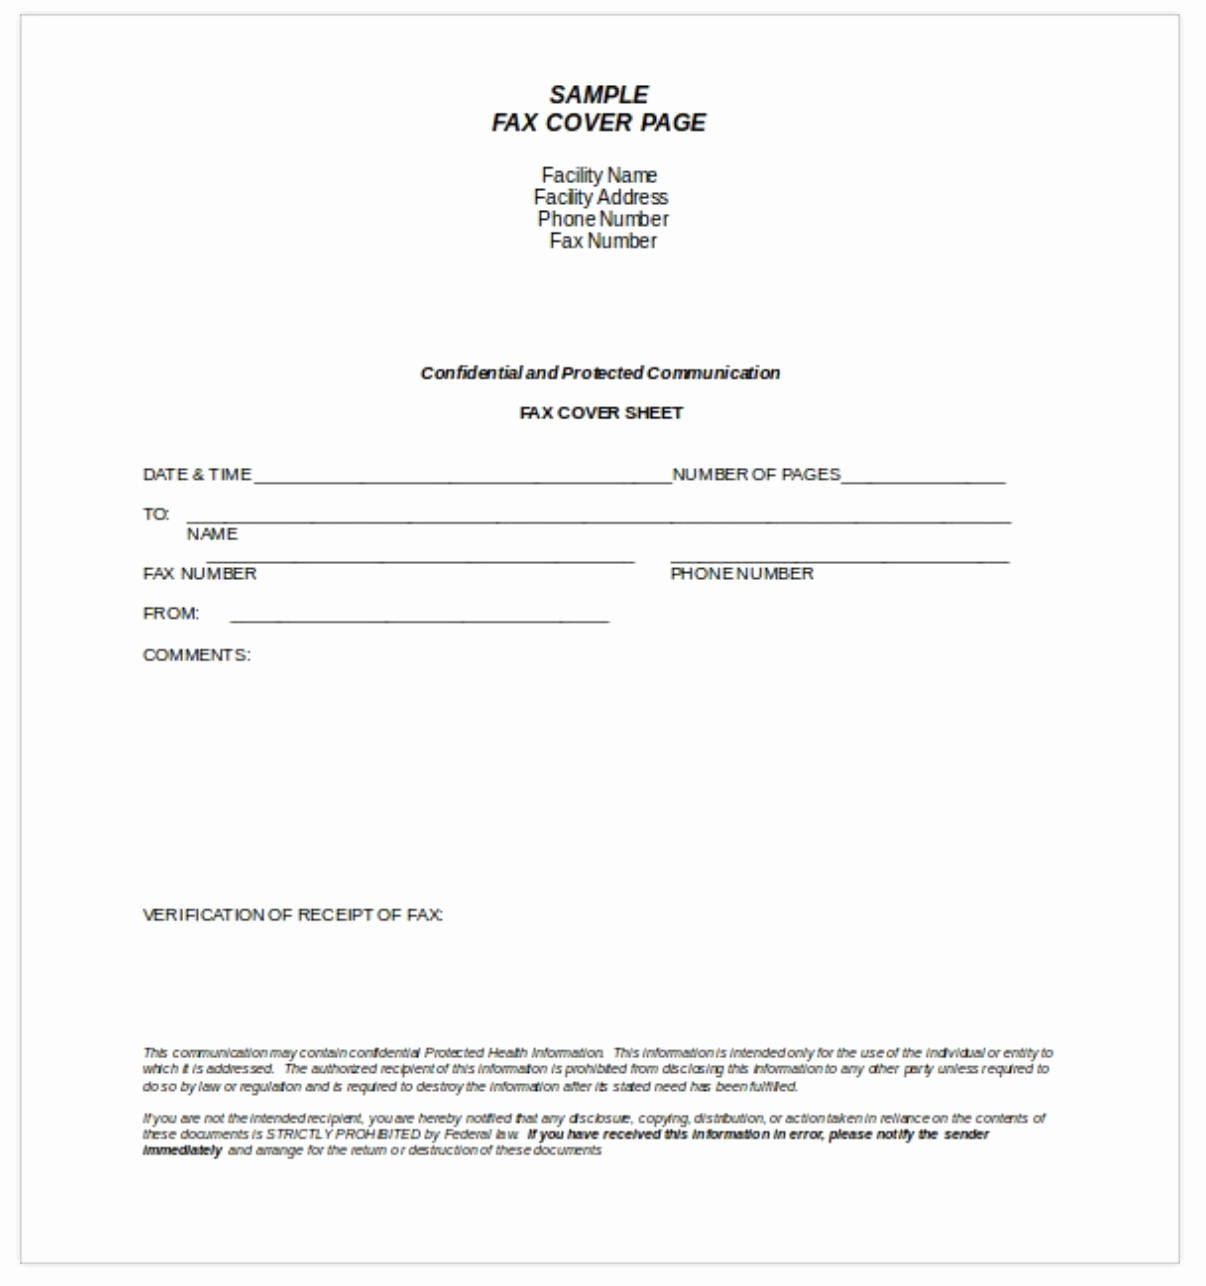 Fax Cover Page Beautiful How to Generate Office Fax Cover Sheets Directly From Your